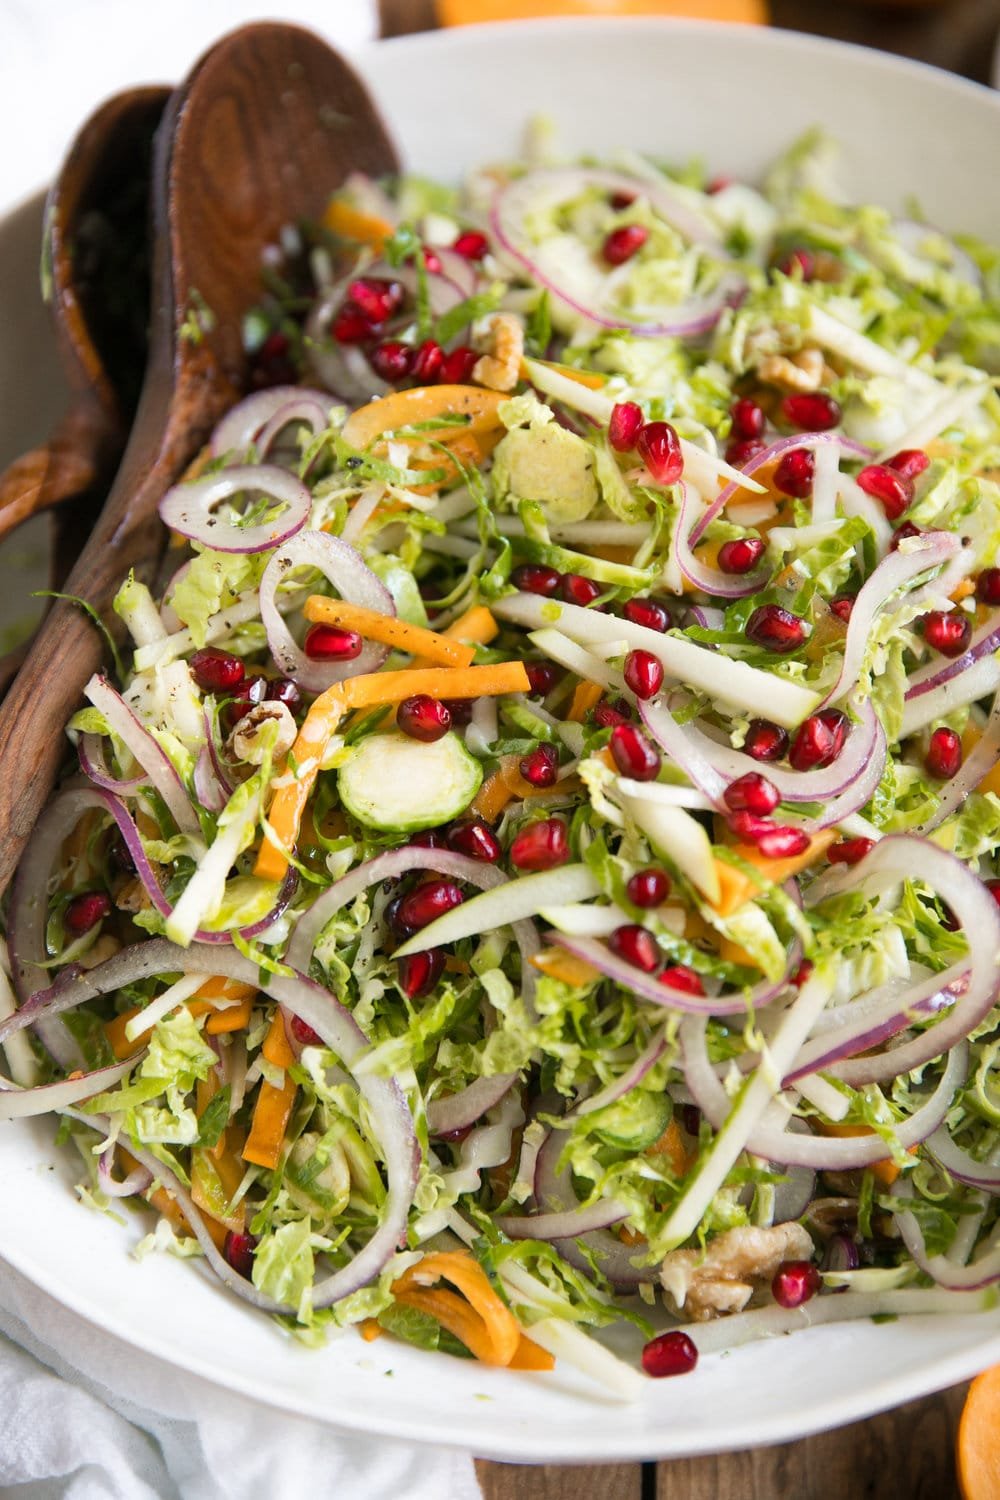 Shredded Brussels Sprout Persimmon Salad. Filled with some of falls finest like pomegranates, walnuts, pomegranates, apples, Brussels sprouts and drizzled with light dijon vinaigrette.